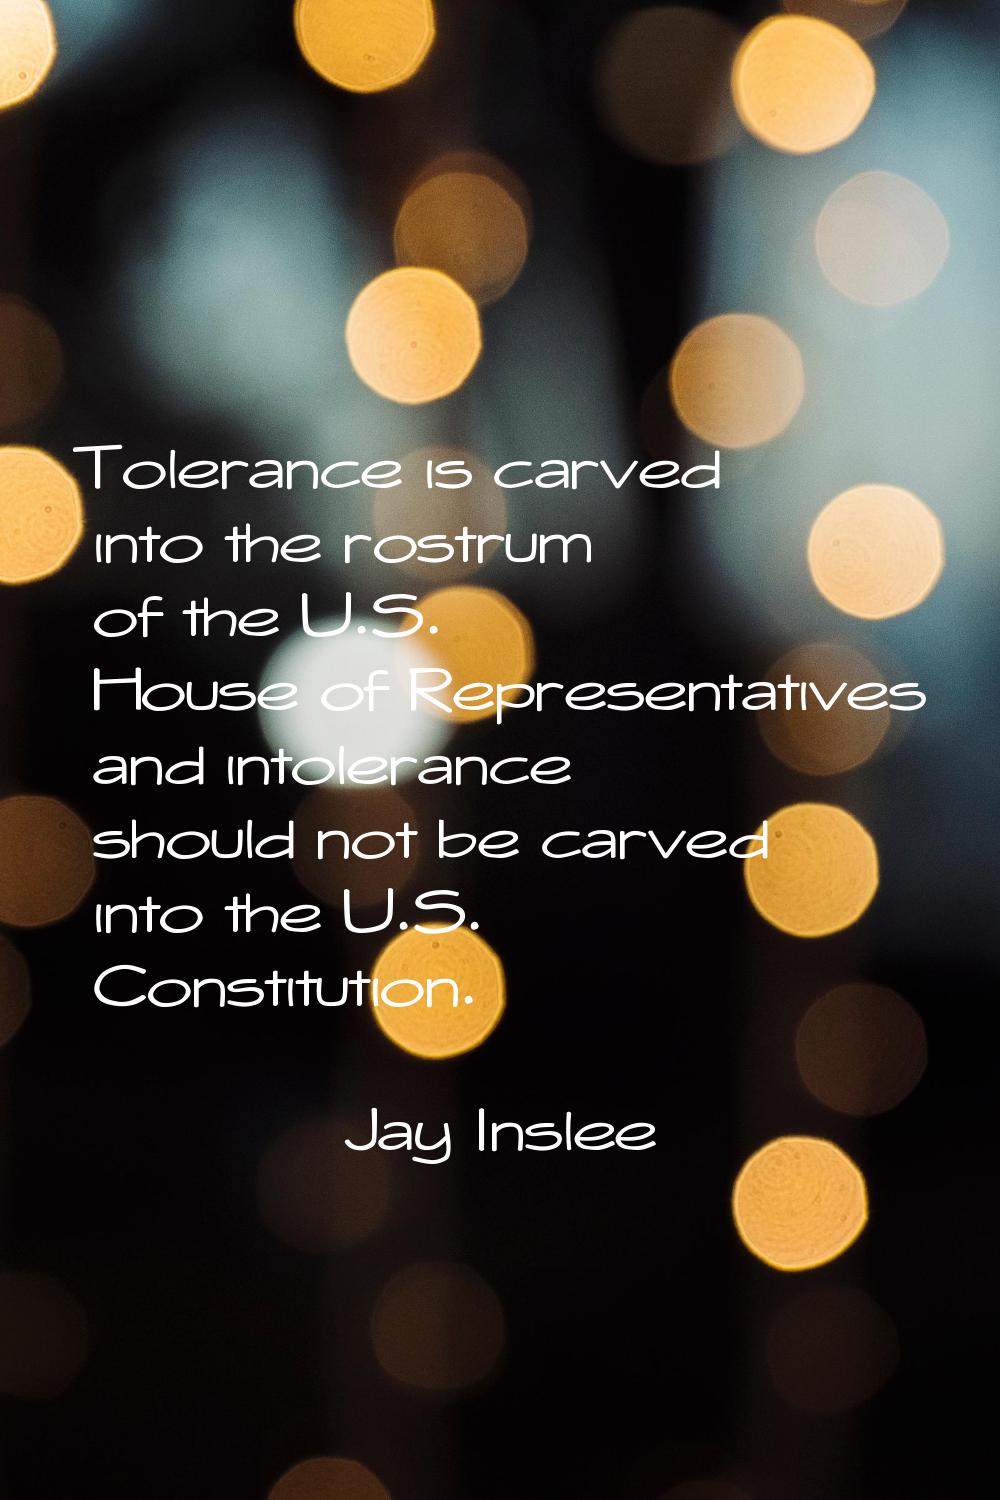 Tolerance is carved into the rostrum of the U.S. House of Representatives and intolerance should no